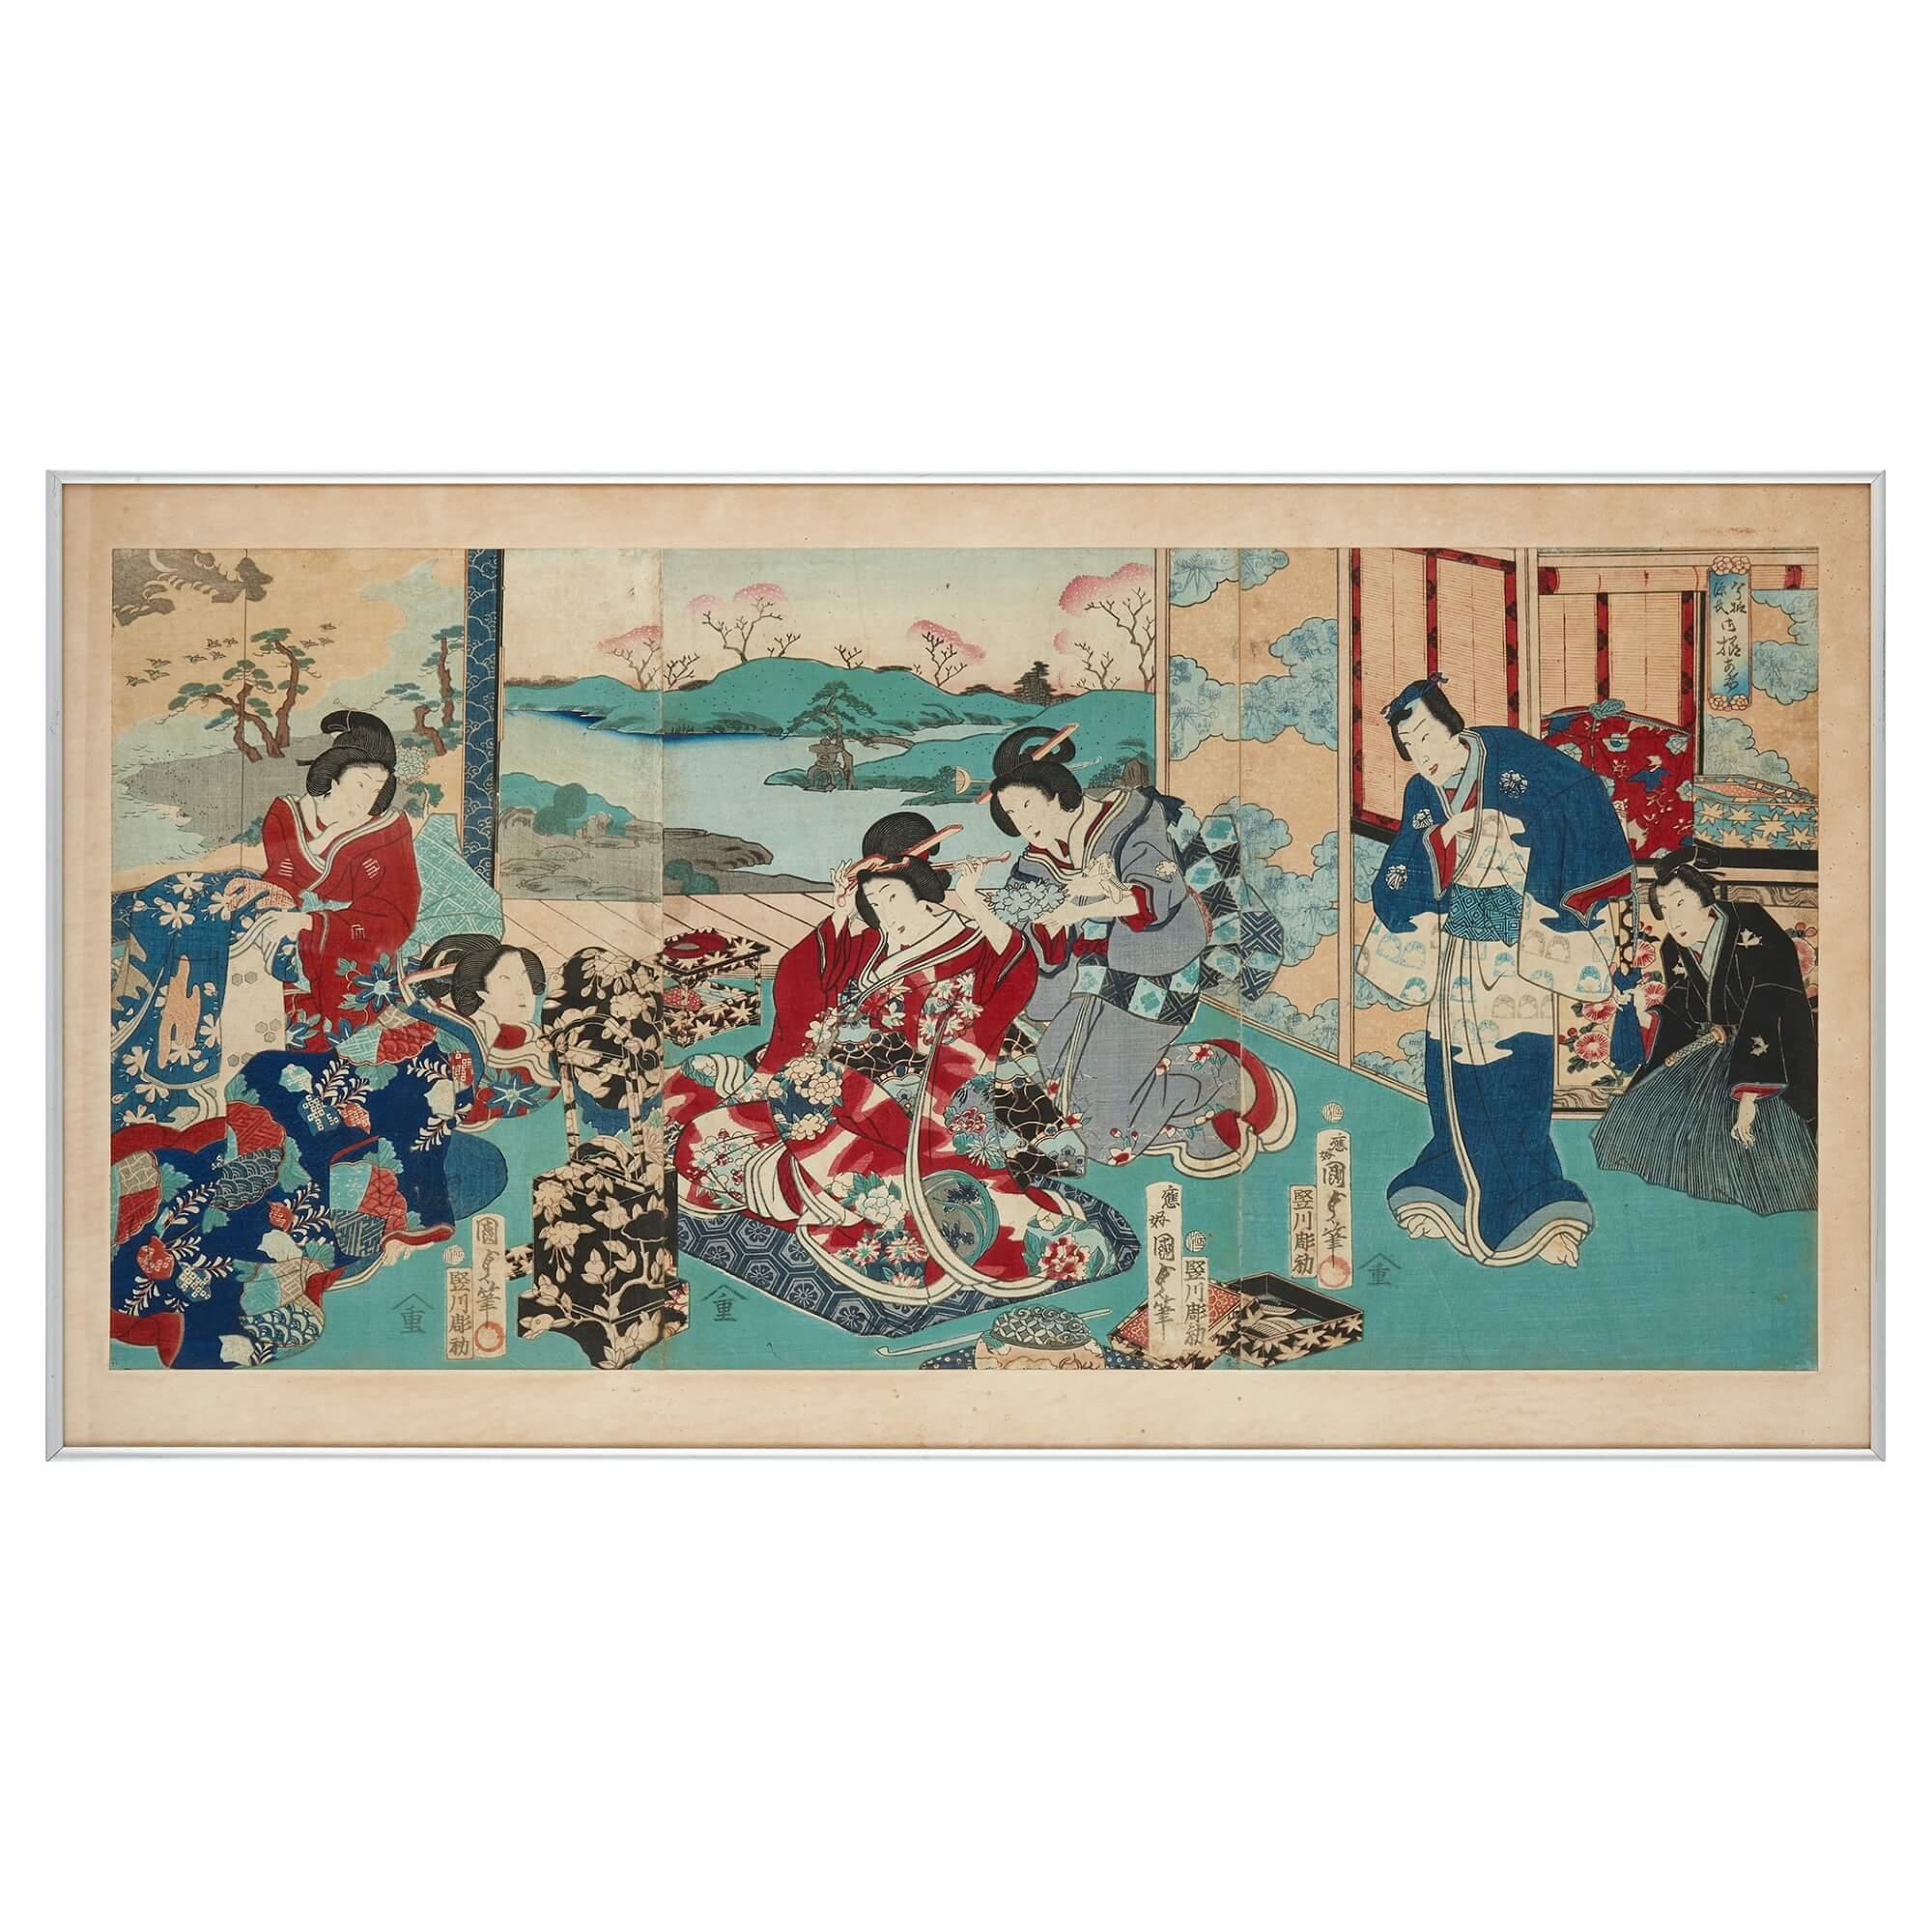 Pair of large Meiji Era Japanese woodblock prints
Japanese, Late 19th Century
Frames: height 42.5cm, width 78.5cm, depth 2cm
Prints: height 35cm, width 78.5cm

These excellent woodblock prints were made in Japan in the late 19th century during